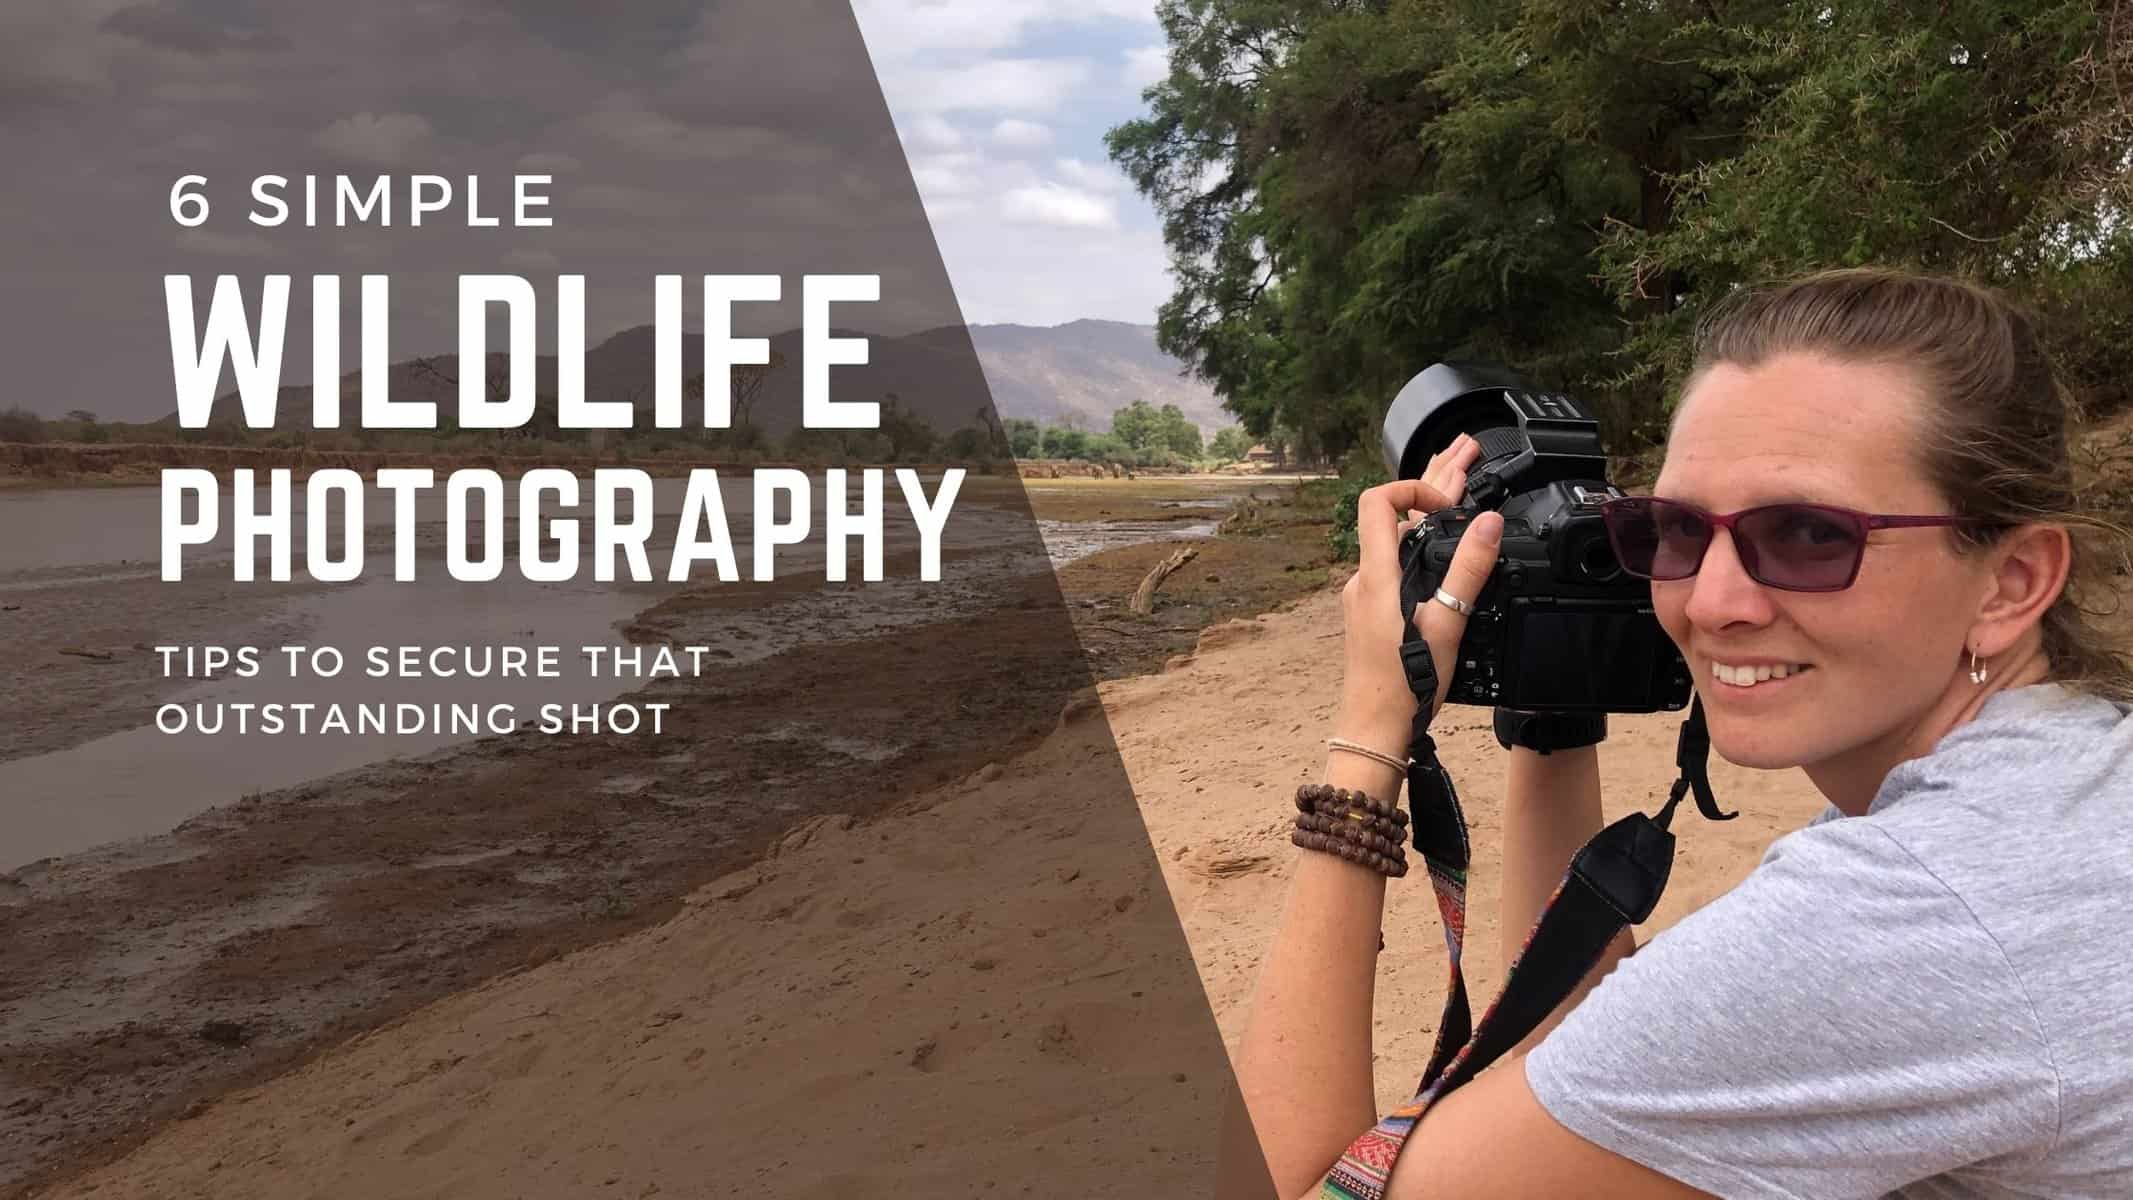 6 simple wildlife photography tips to secure that outstanding shot